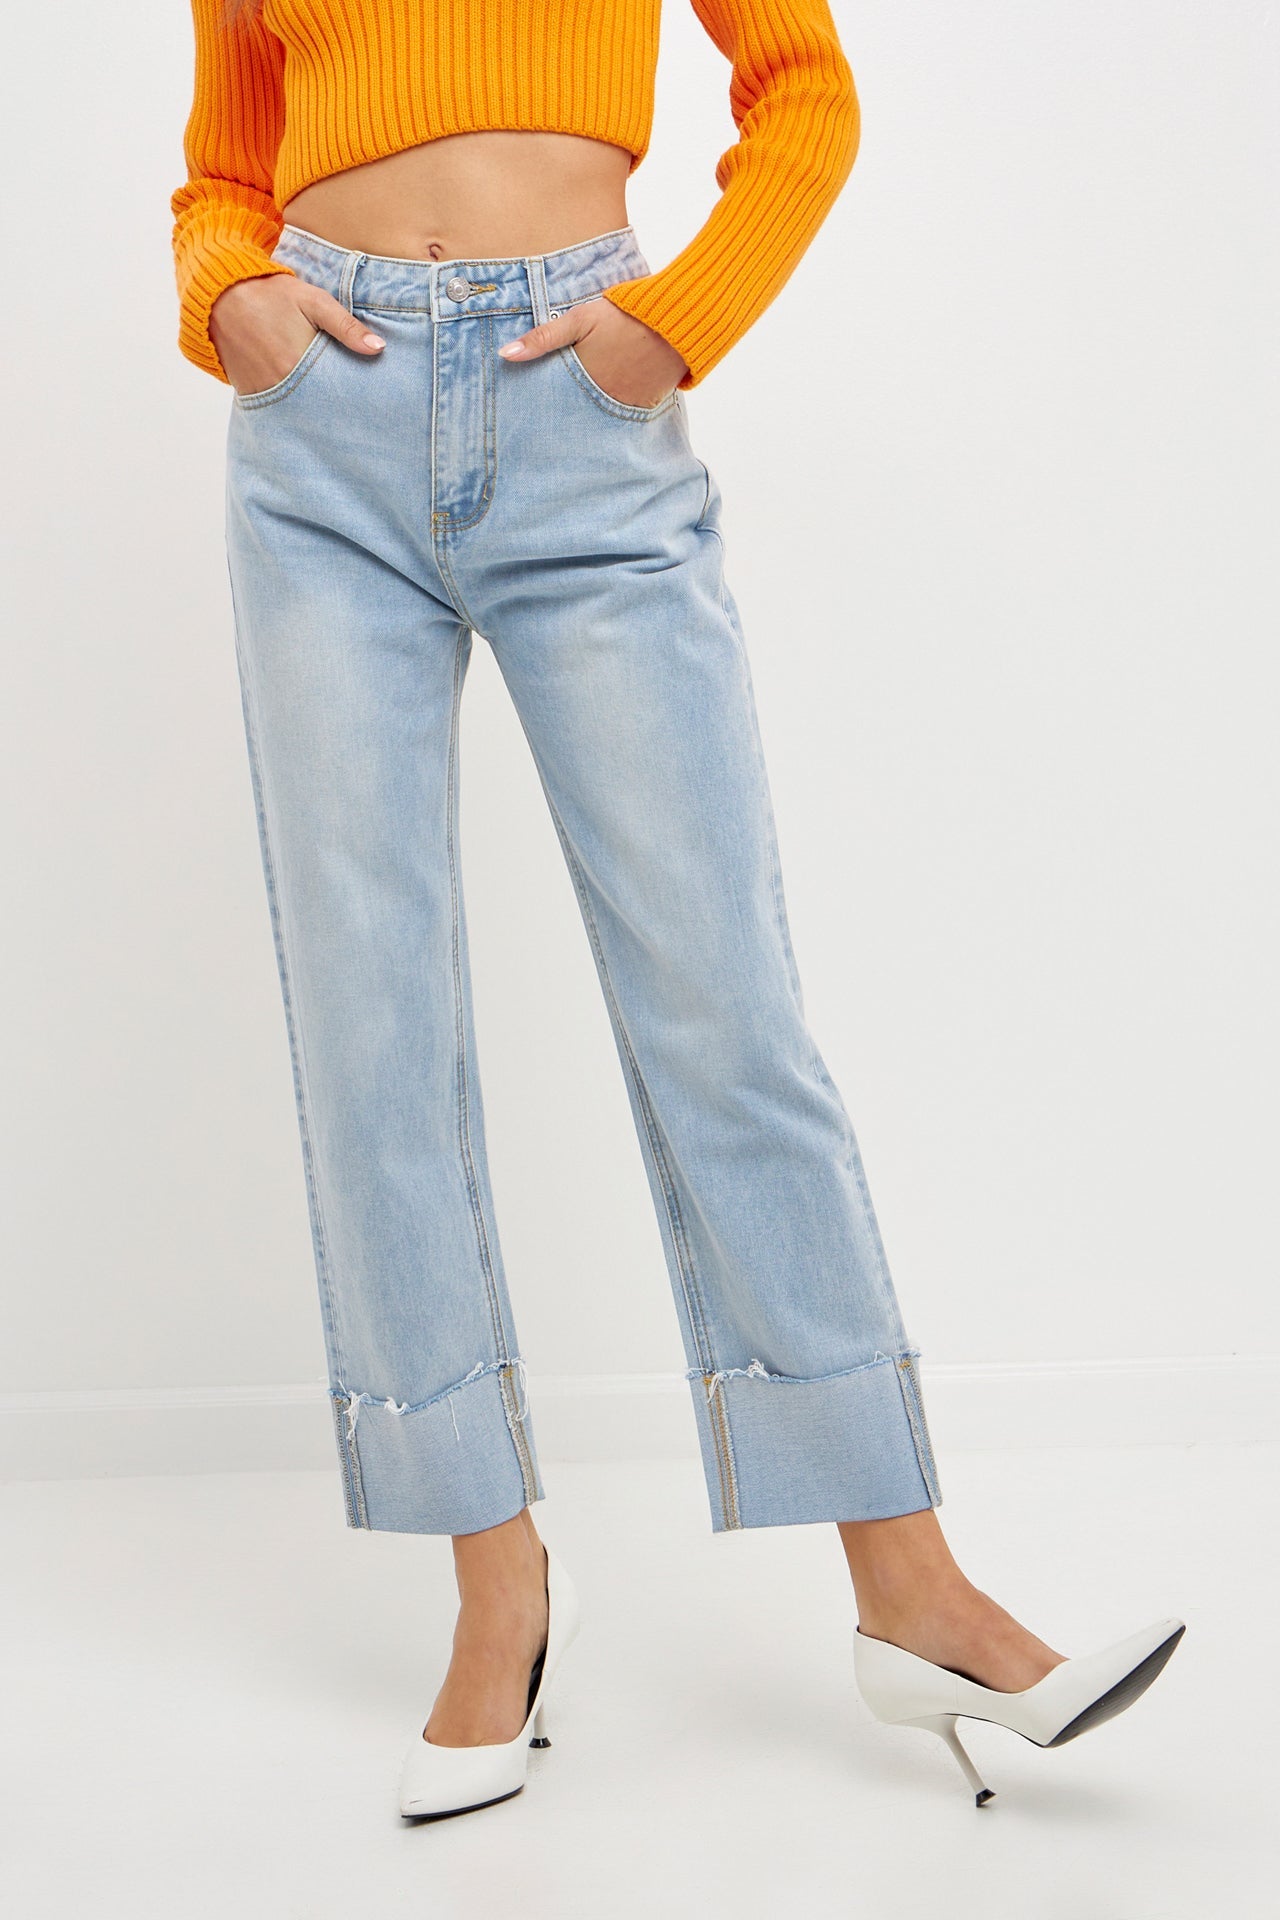 GREY LAB-Turn Over Hem Regular Fit Jeans-JEANS available at Objectrare